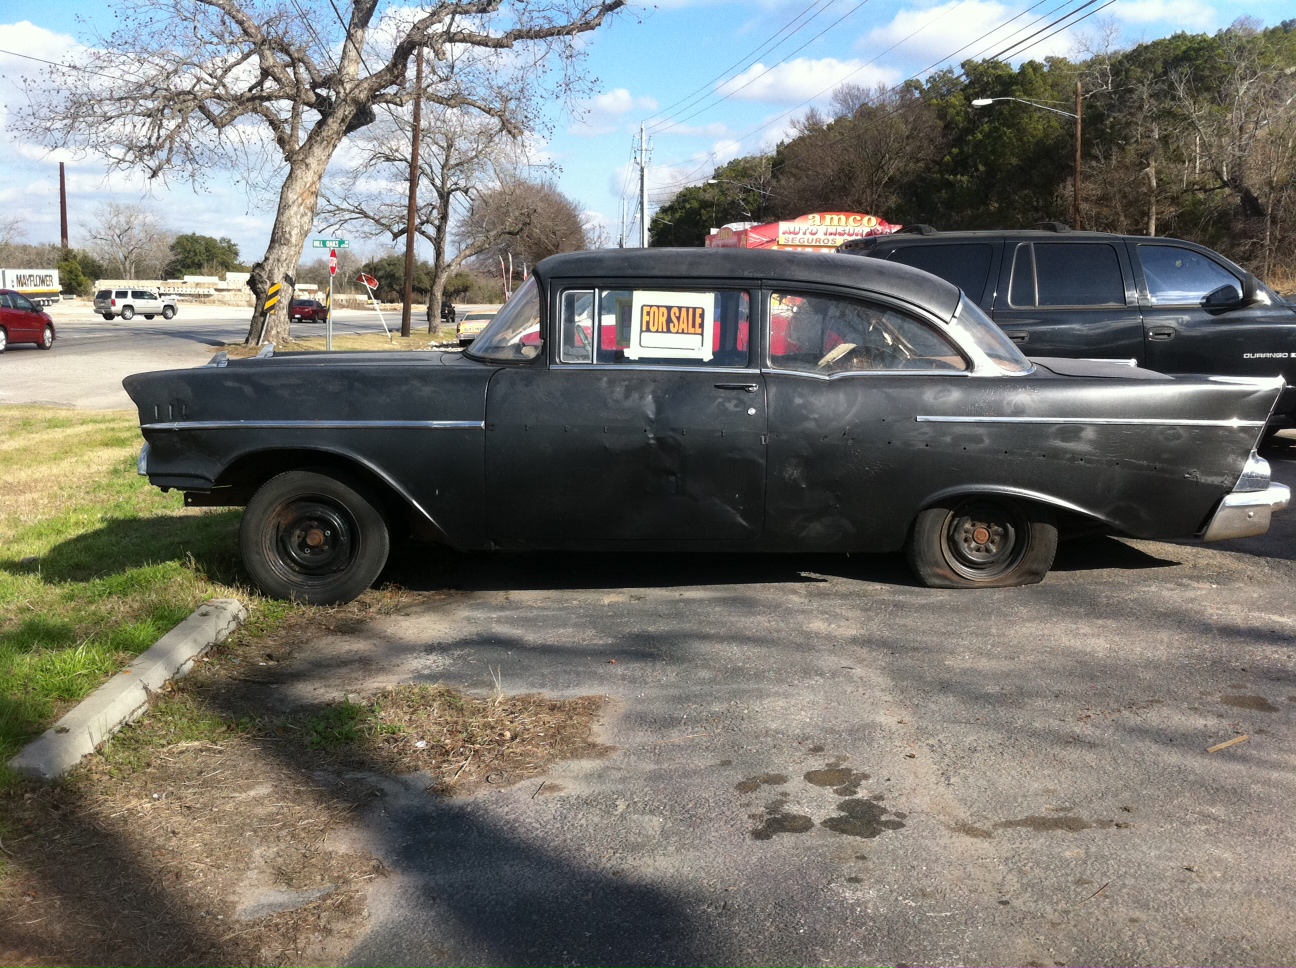 1957 Chevrolet for sale, side view